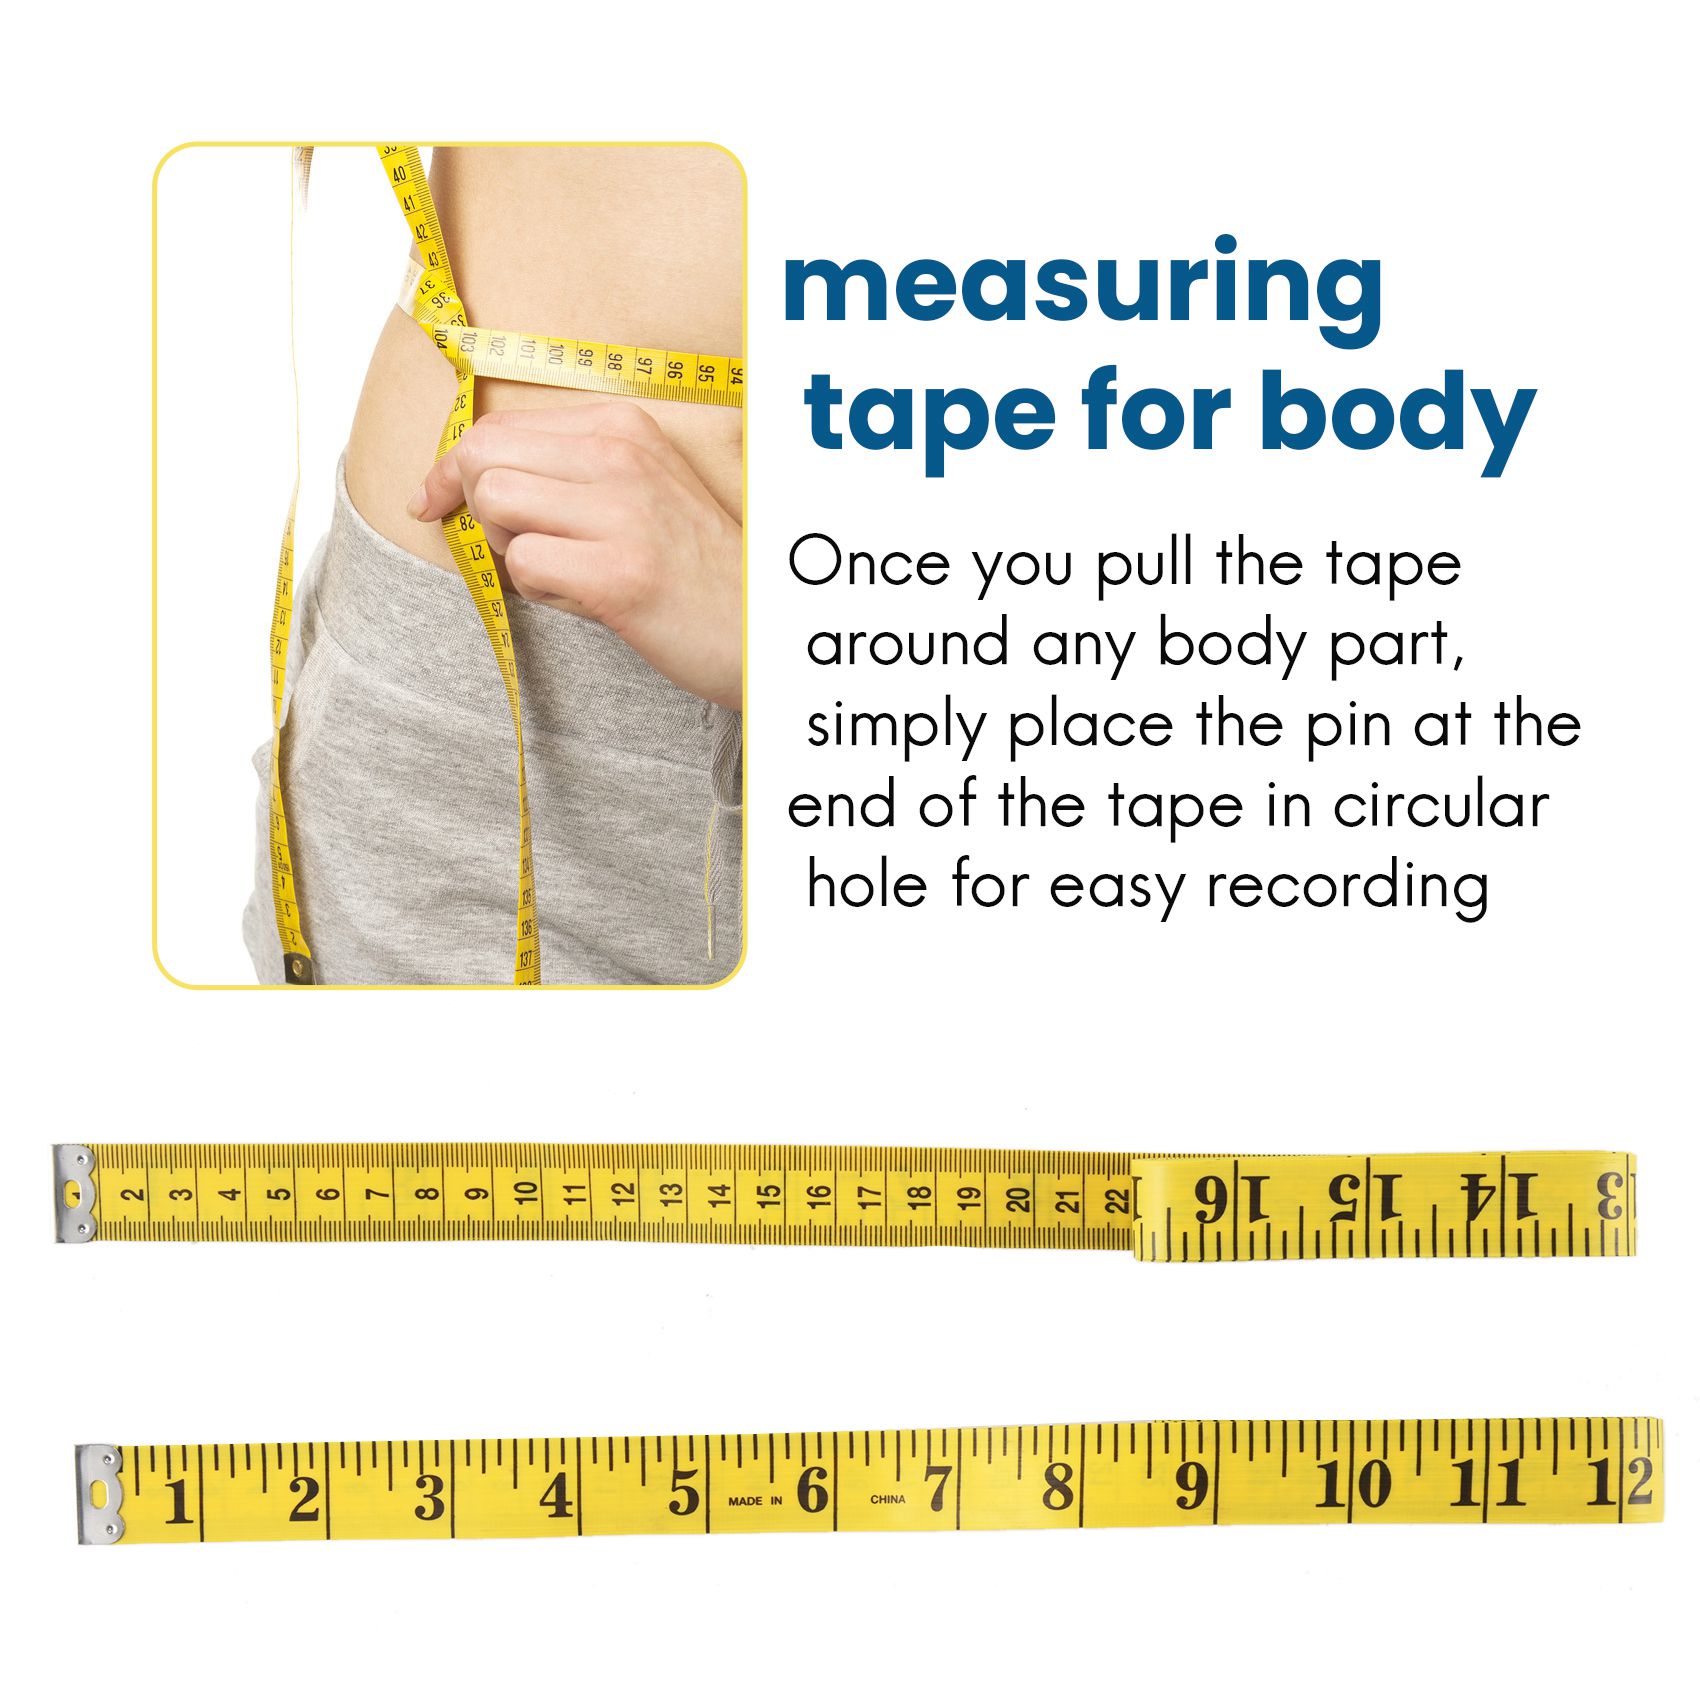 Soft 3m 300cm sewing tailor's tape body measuring ruler tailor's